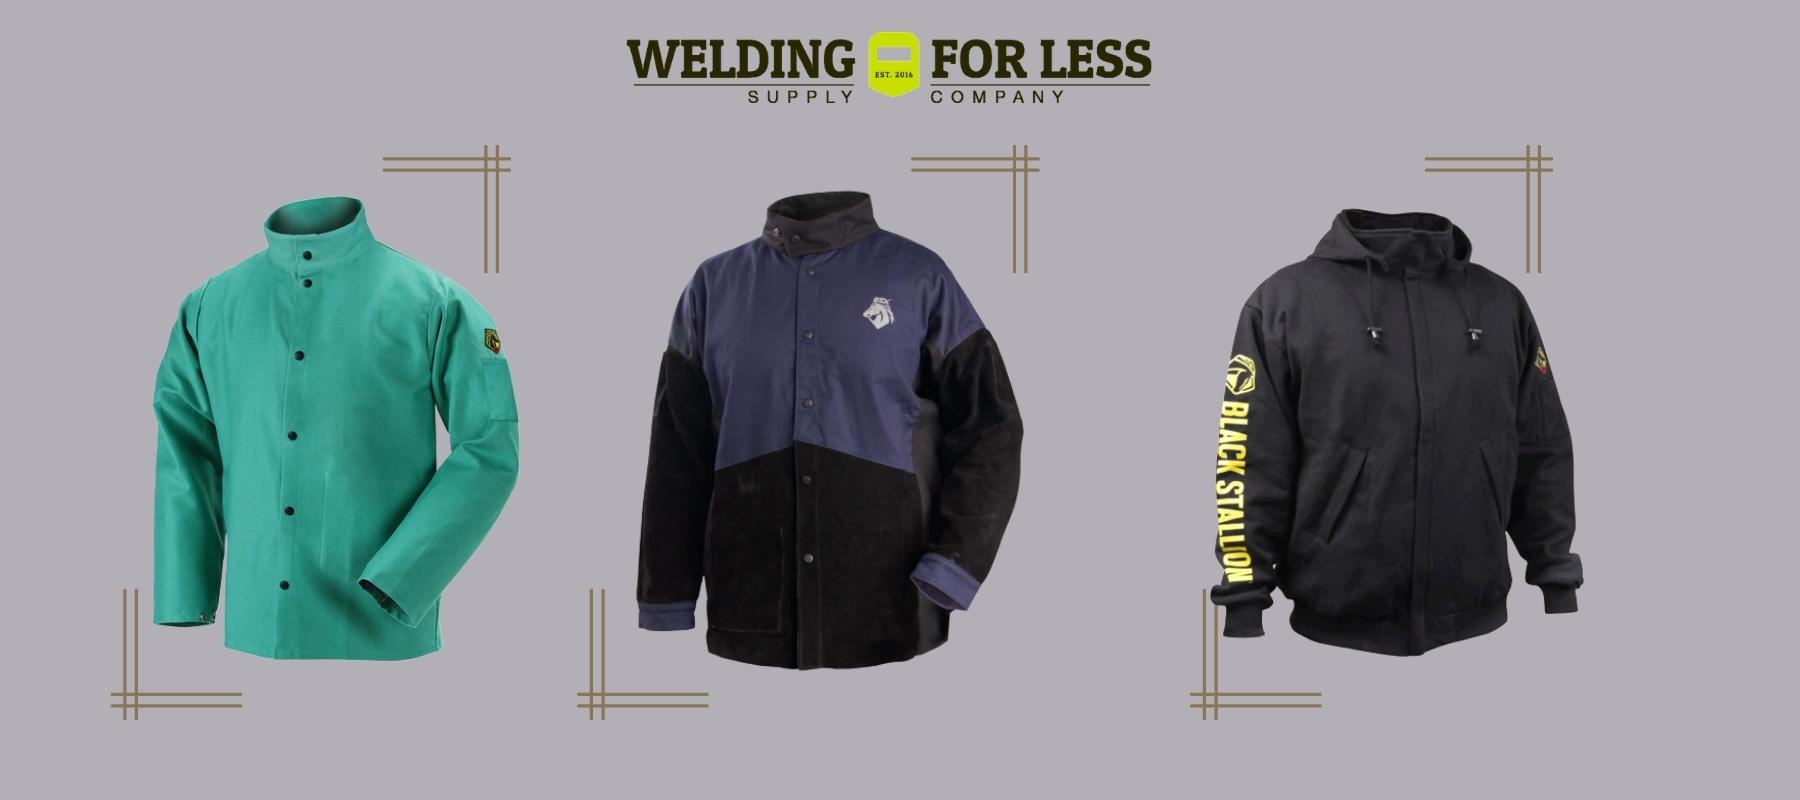 Best Safety Welding Jackets in the USA